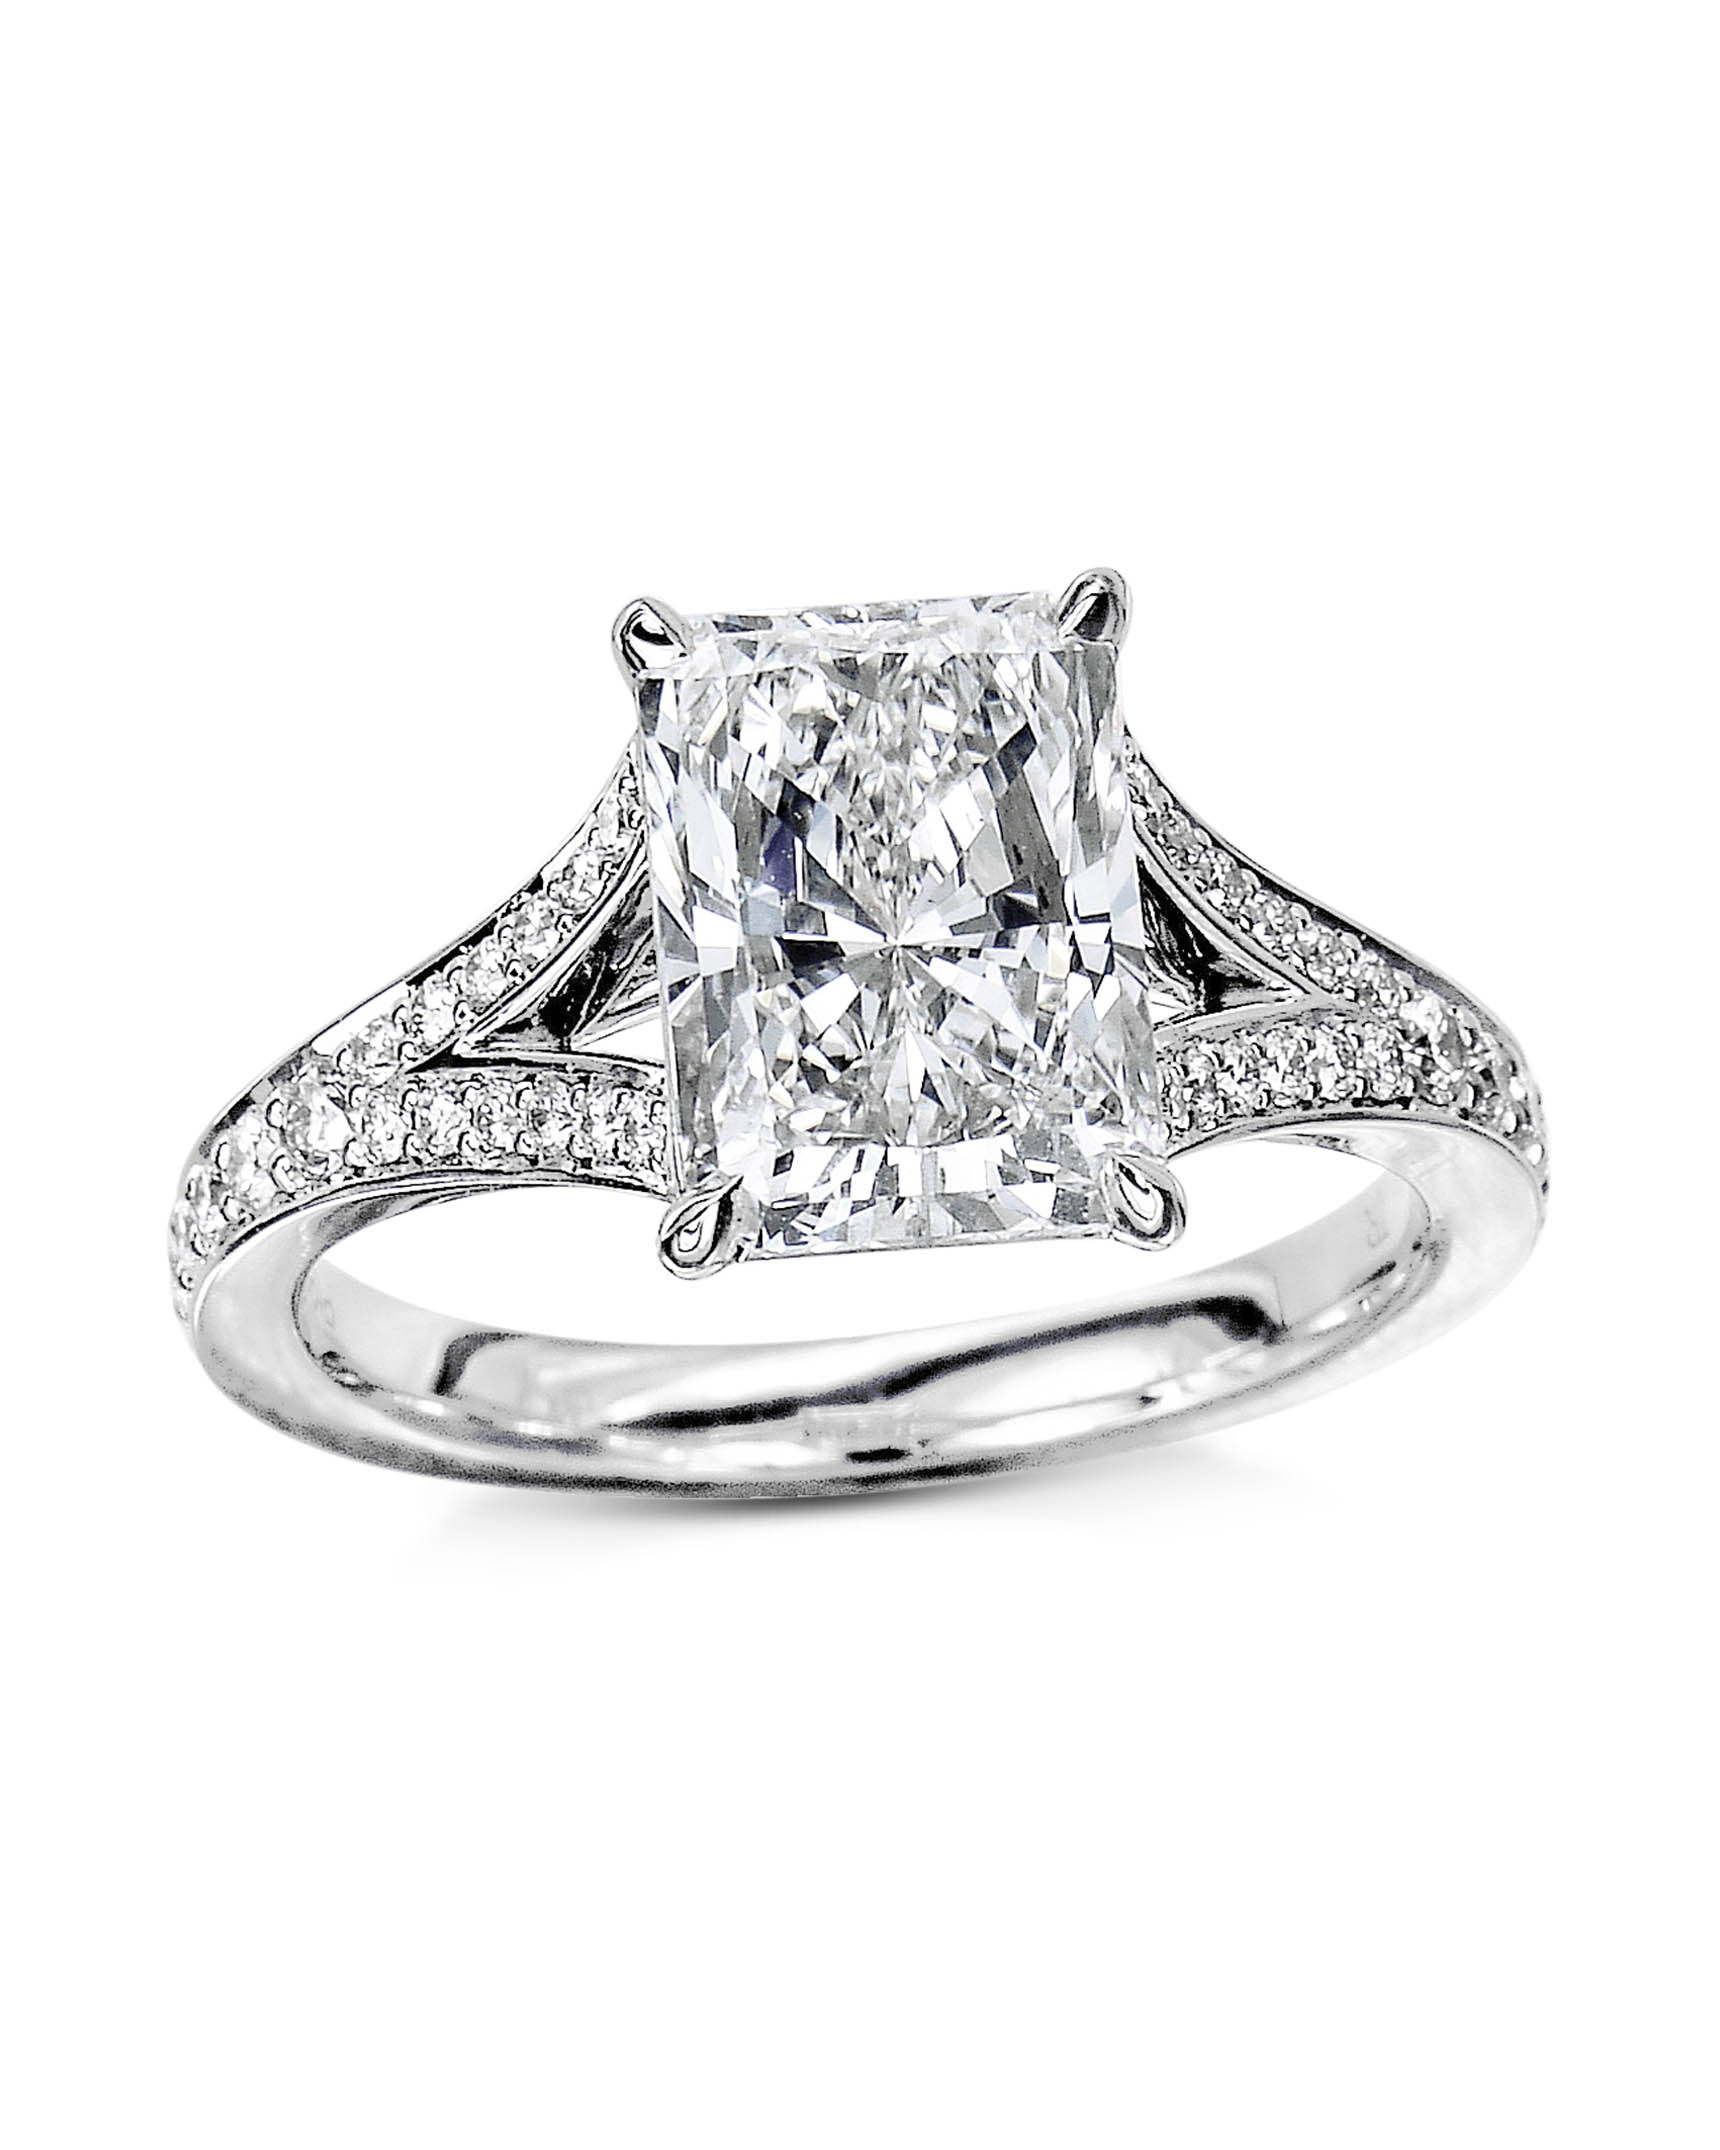 Honest opinion on wedding band with split shank engagement ring :  r/EngagementRings